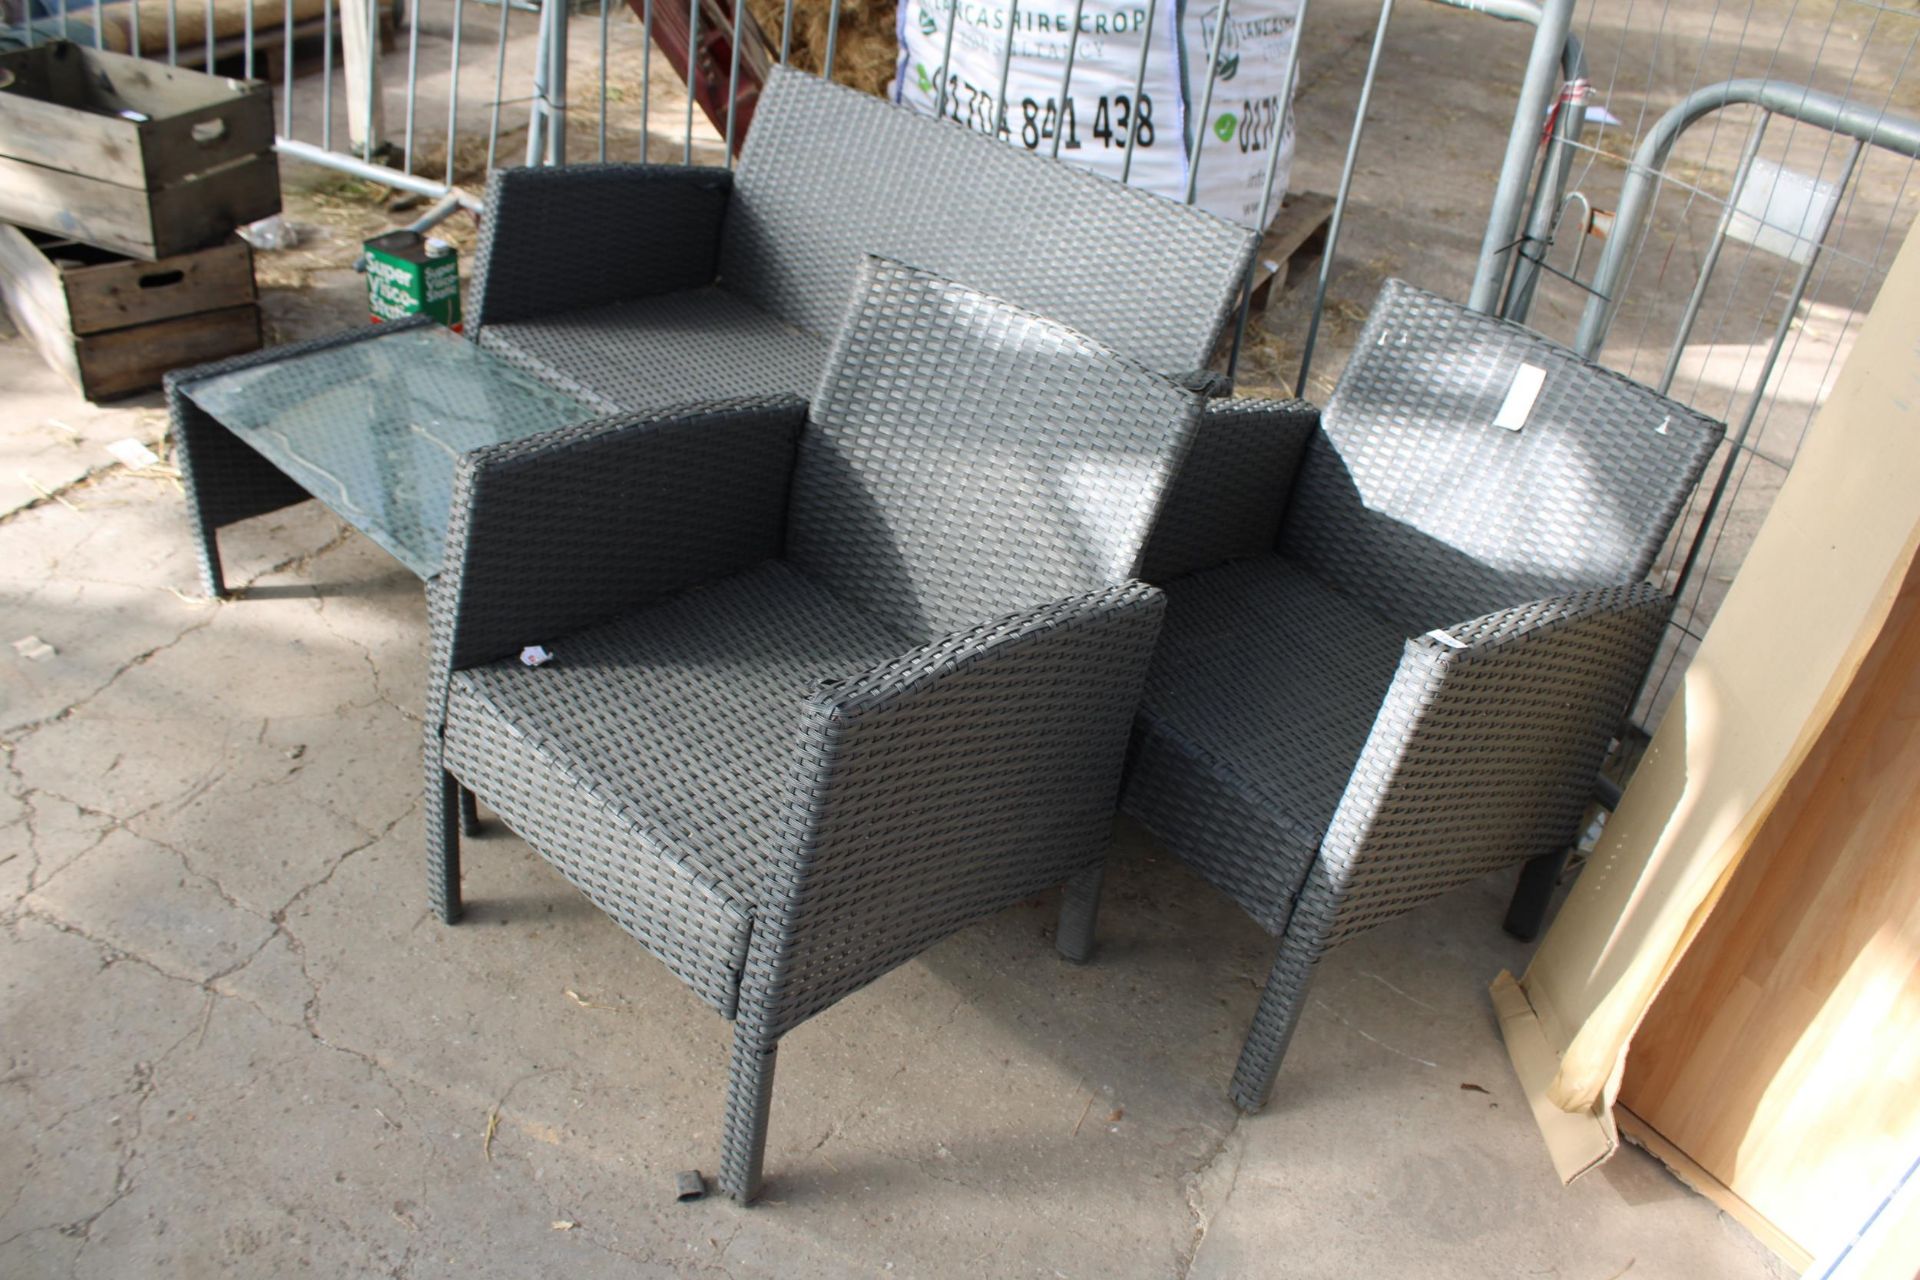 A RATTAN GARDEN FURNITURE SET COMPRISING OF A TWO SEATER BENCH, TWO CHAIRS AND A COFFEE TABLE - Image 2 of 3